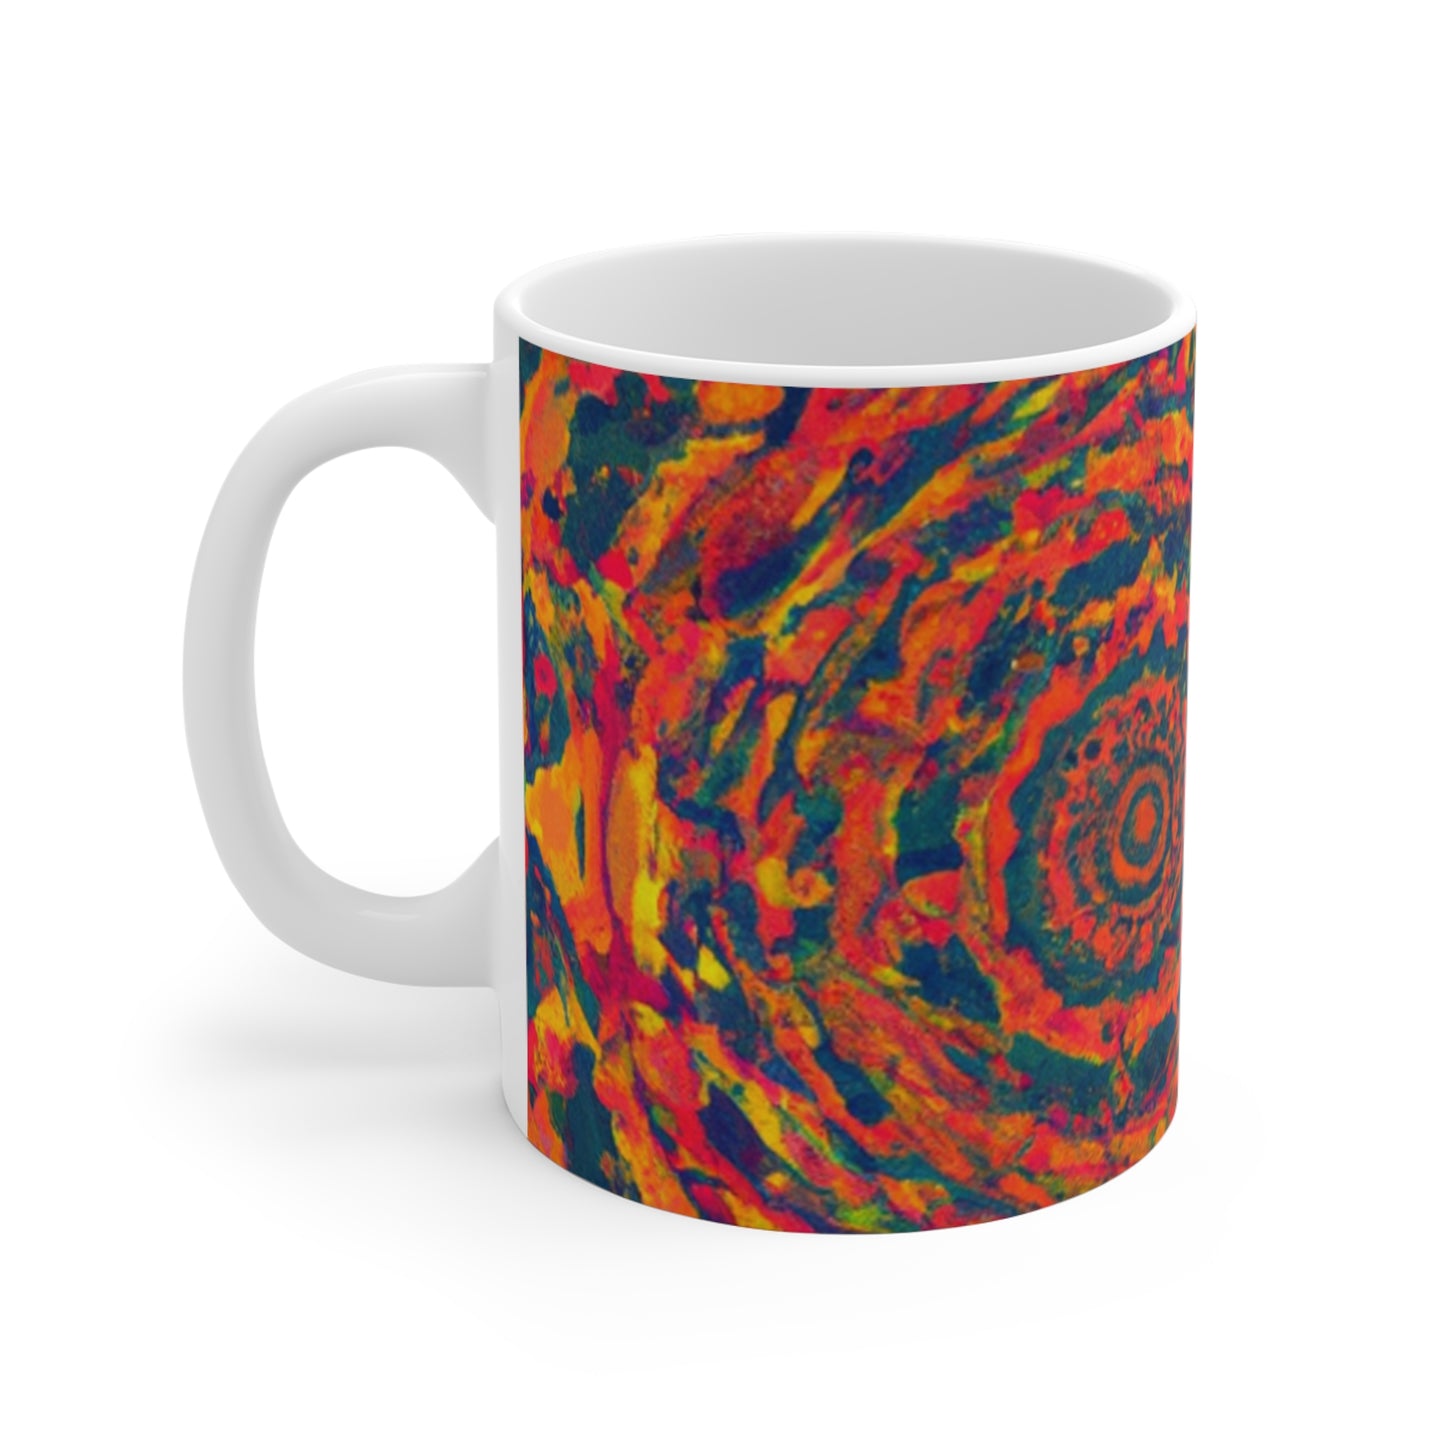 Marilyn's Coffee House - Psychedelic Coffee Cup Mug 11 Ounce